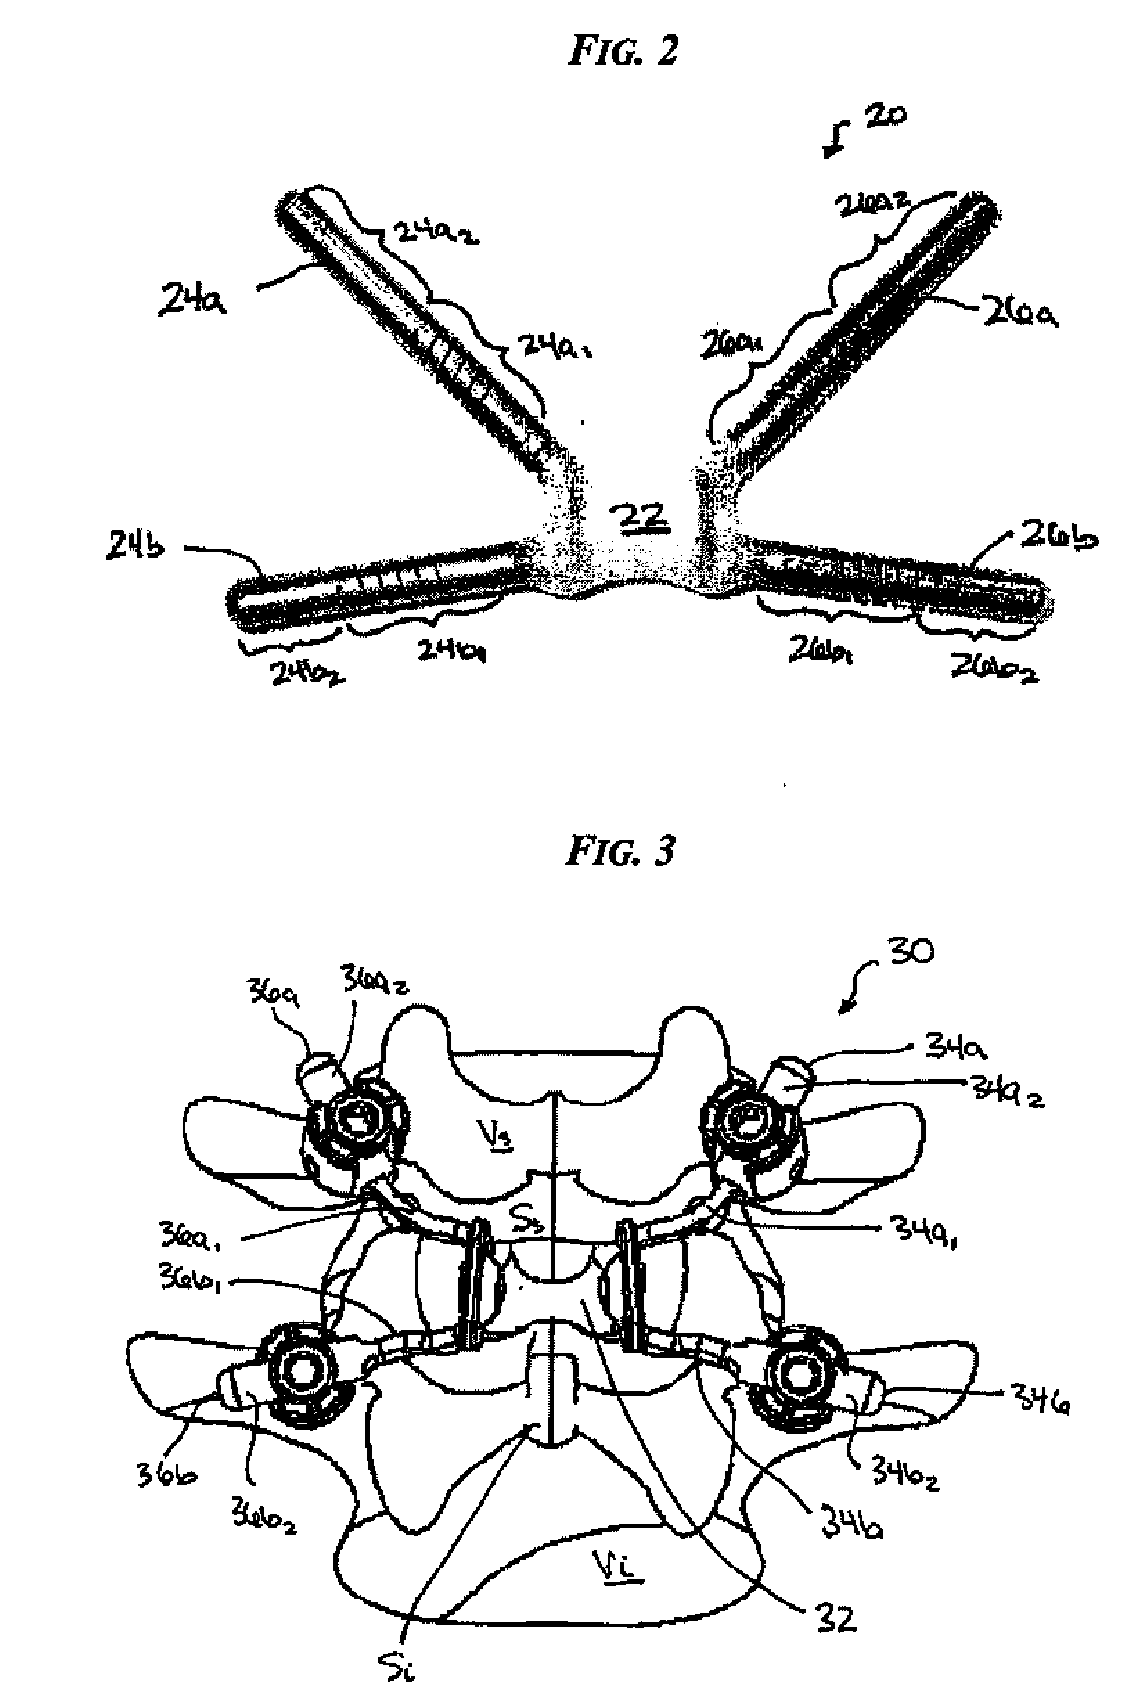 Multi-level posterior dynamic stabilization systems and methods